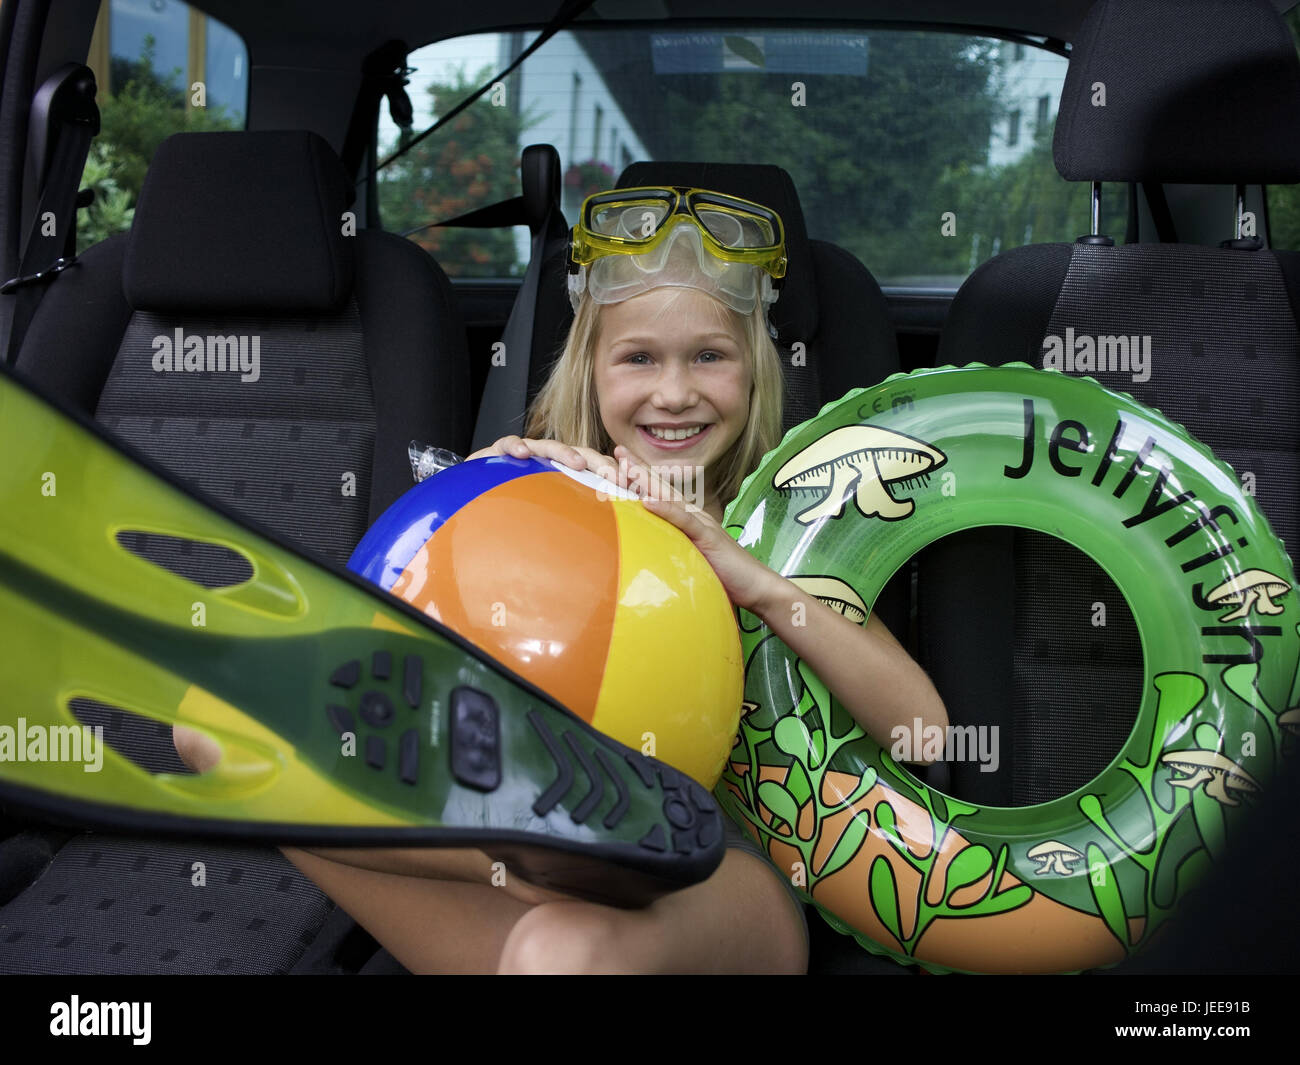 Passenger car, ground, girl, bath implements, sit, people, children, childhood, blond, long-haired, happily, diver's glasses, fins, beach-ball, swimming tyre, pneumatically, holidays, vacation, leisure time, holiday trip, beach holiday, prejoy, joy, fun, swimming things, car, sit, Stock Photo